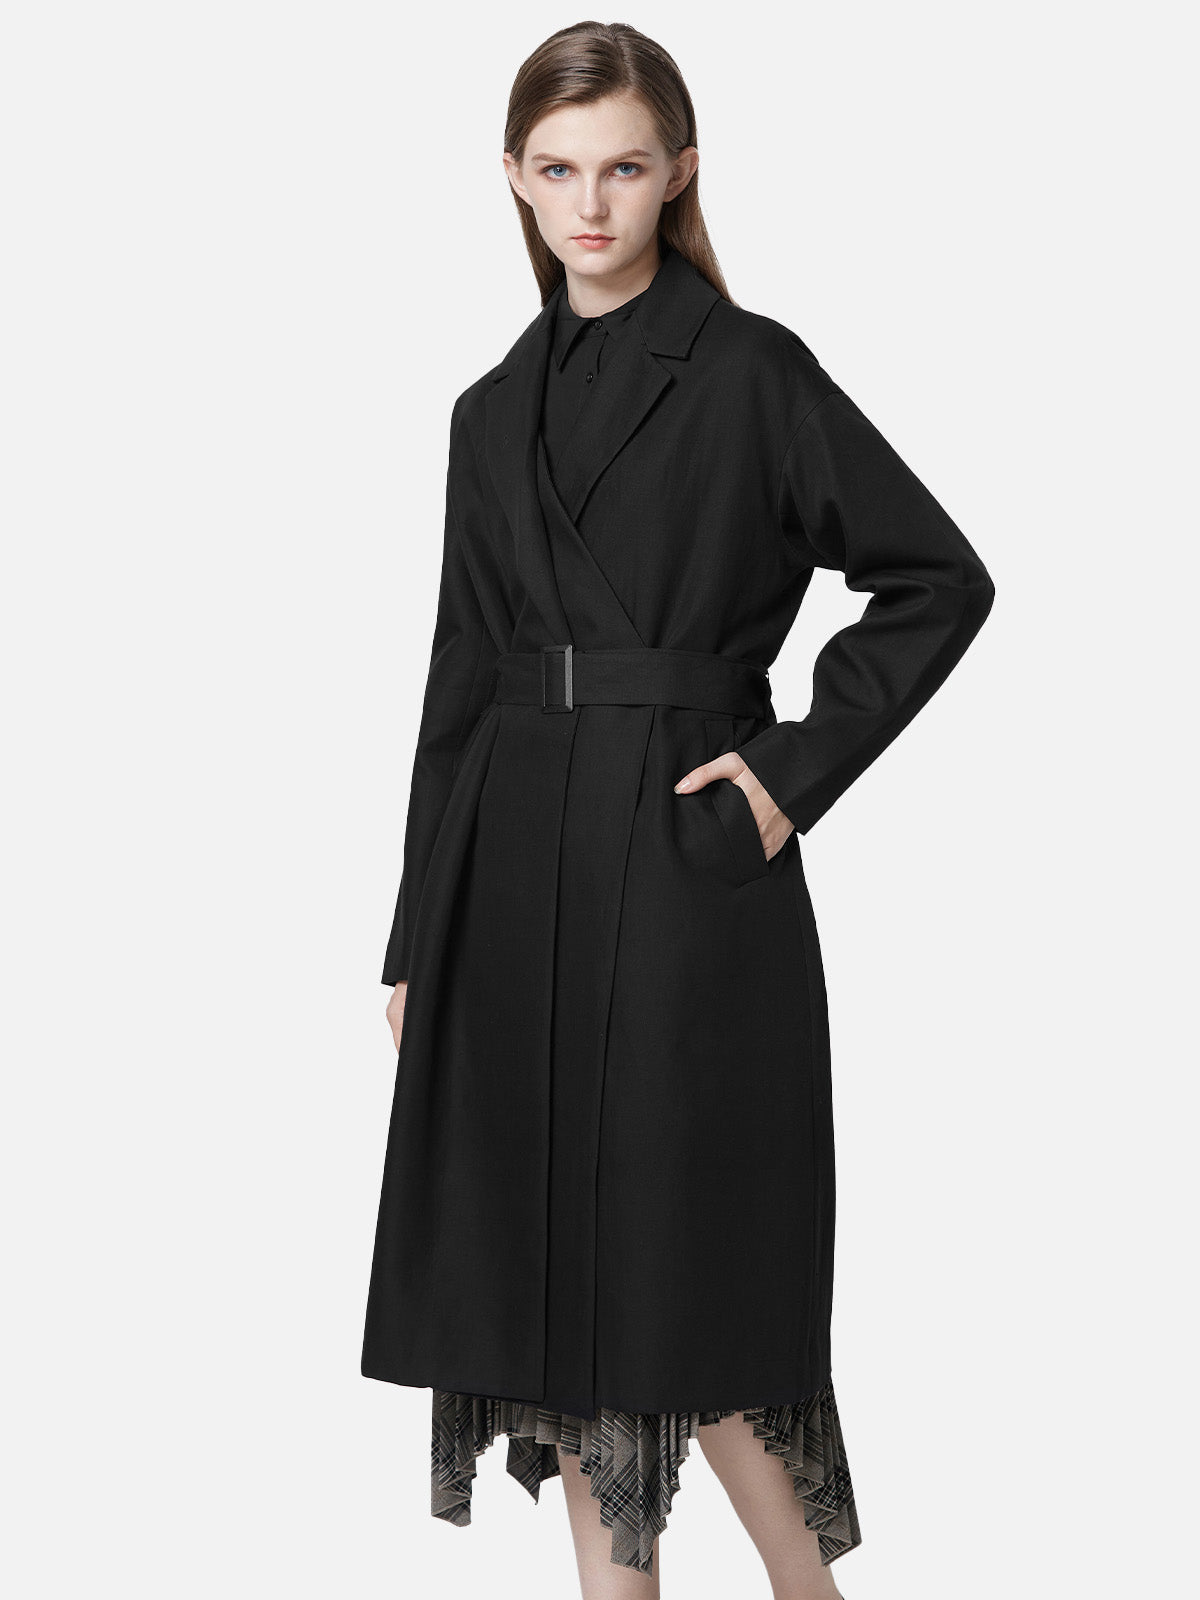 Commuter Style Patchwork Receiving Waist Long Trench Coat